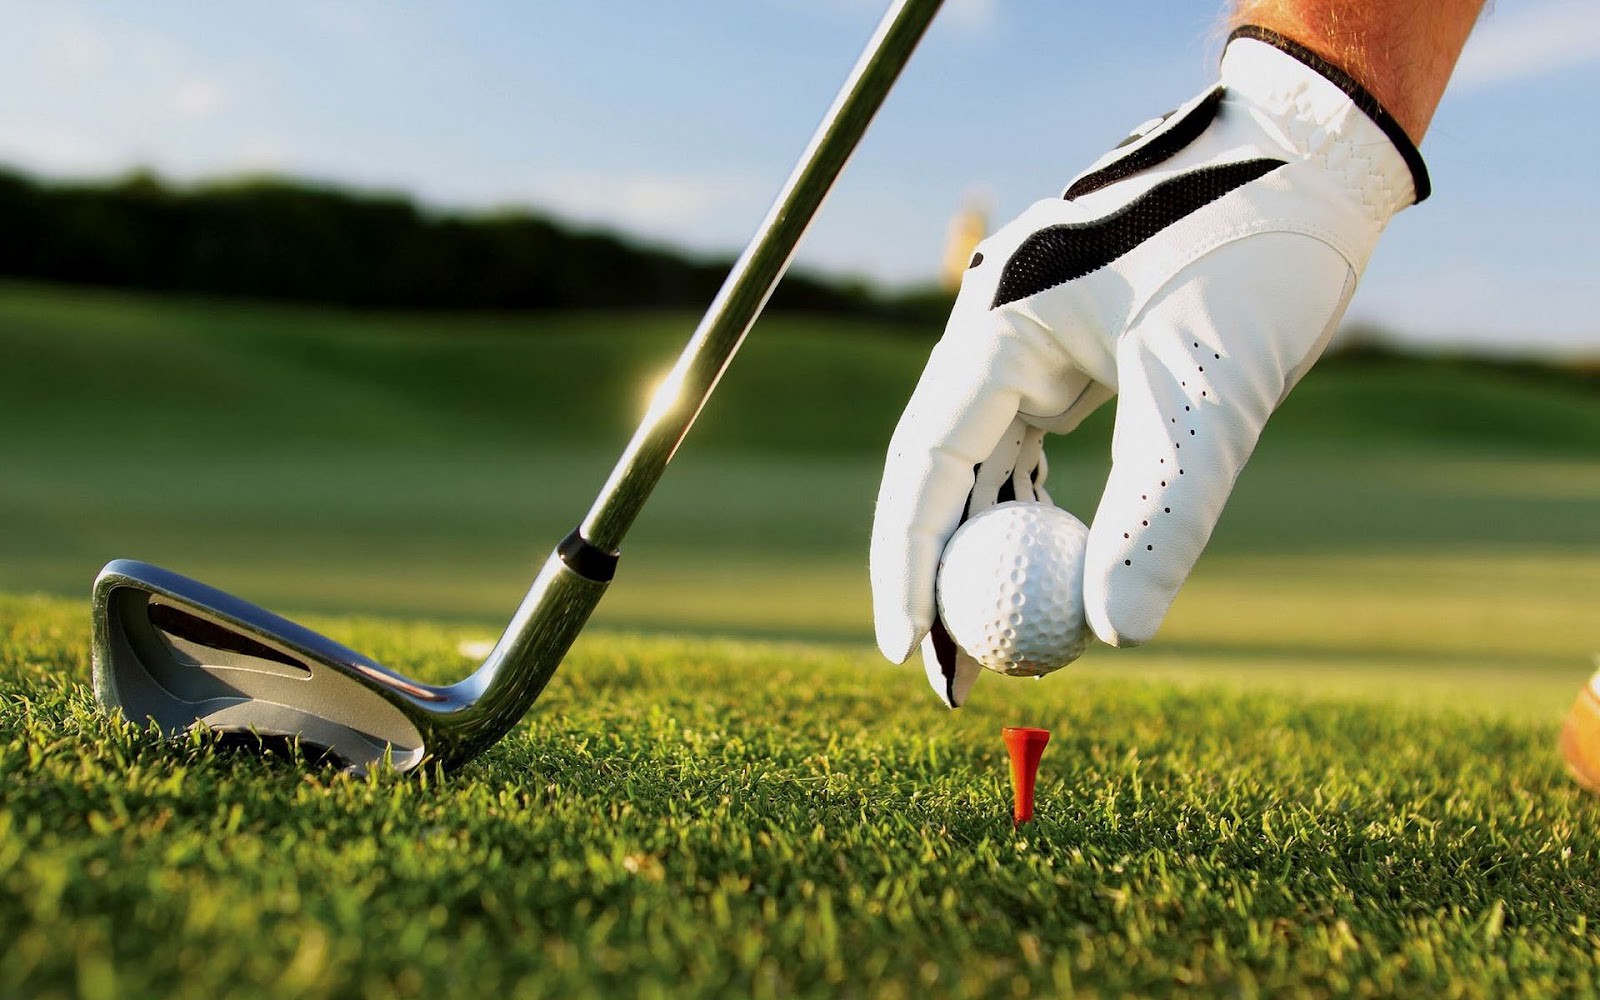 Golf Themes And Background HD Wallpaper